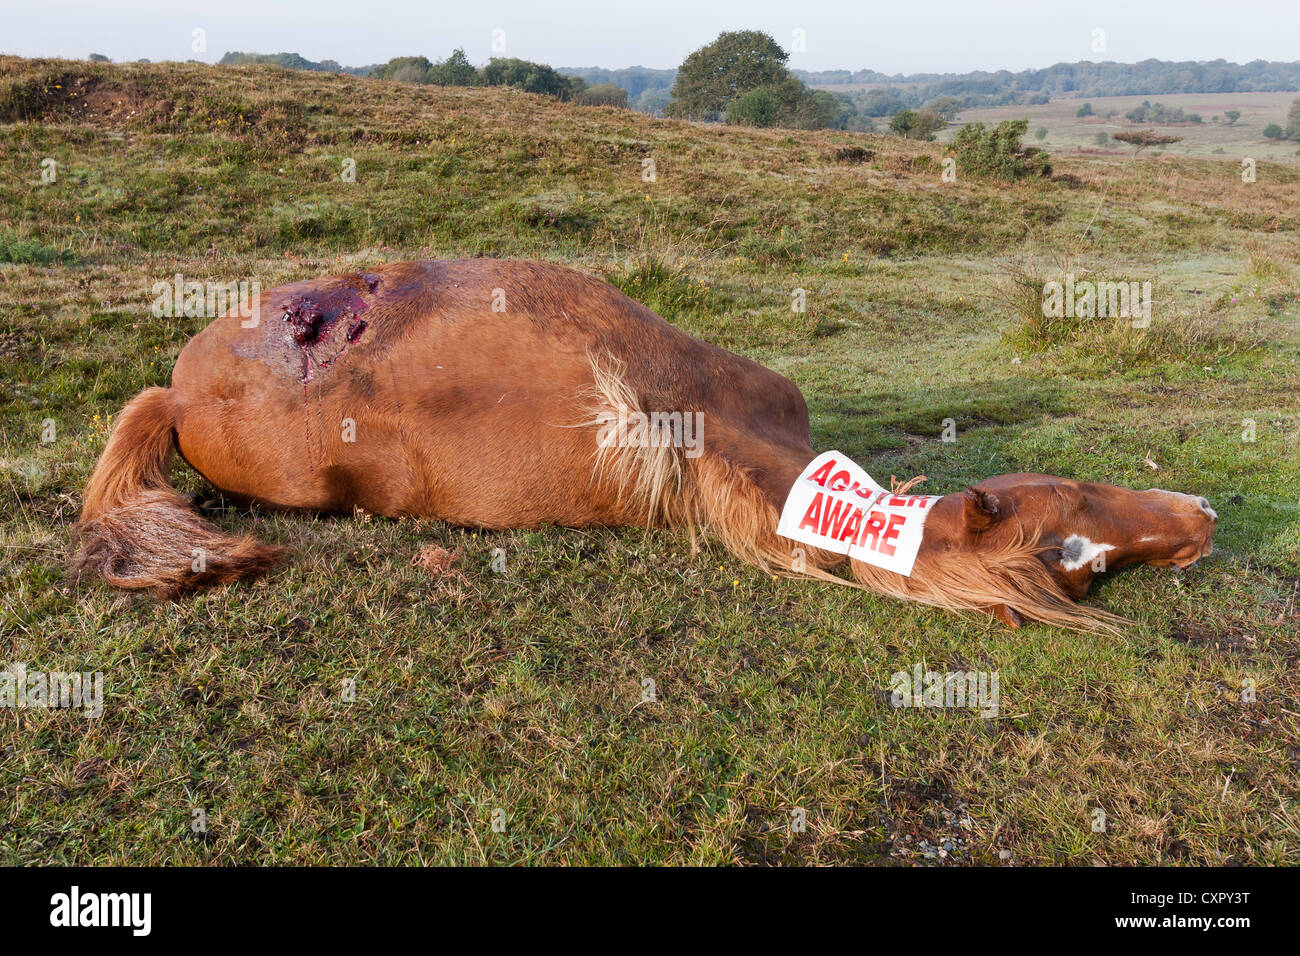 A pony has been hit and killed on the road by a car or lorry in the New Forest National Park, UK Stock Photo